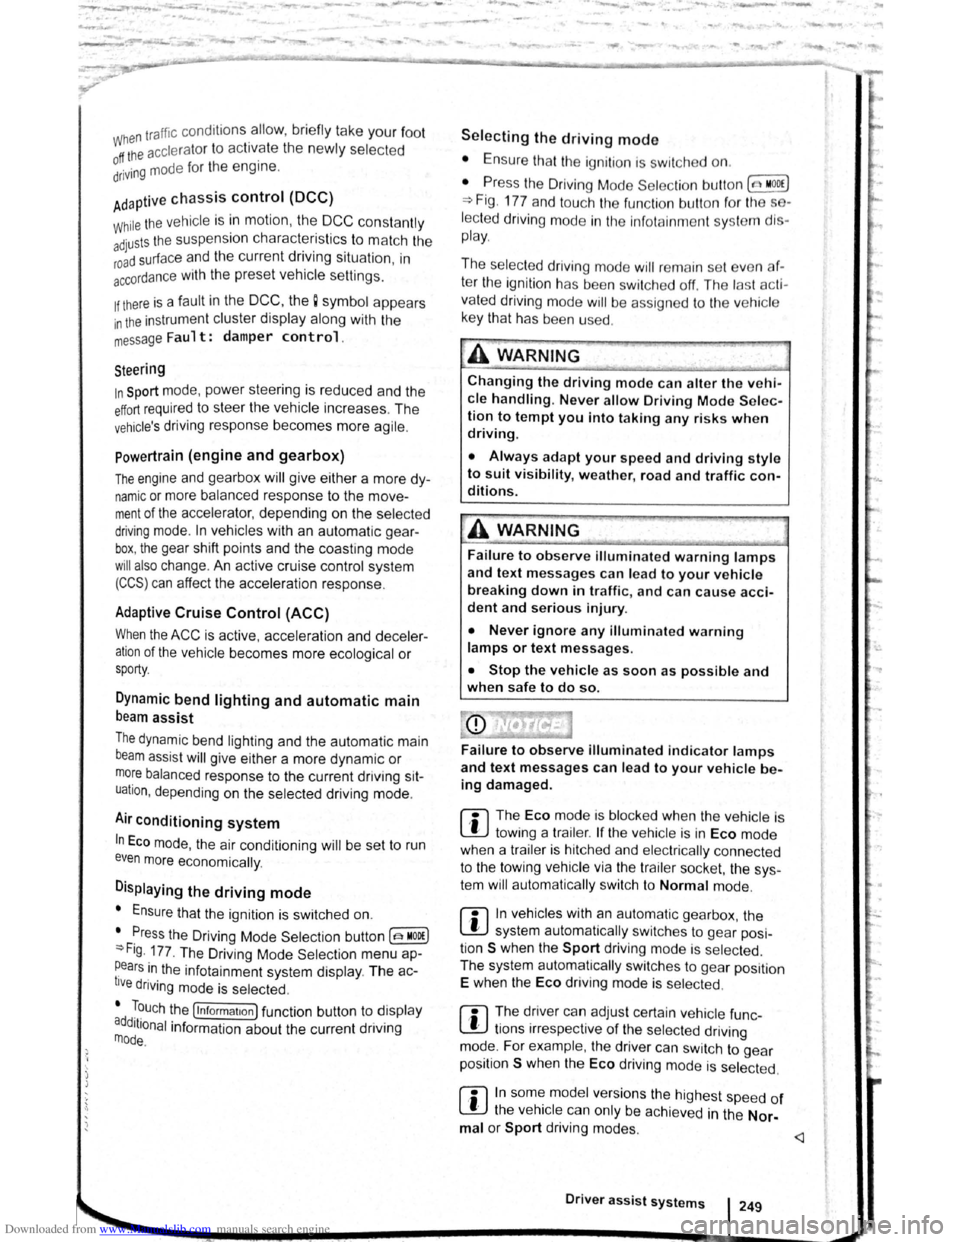 VOLKSWAGEN BEETLE 2010  Owners Manual Downloaded from www.Manualslib.com manuals search engine  J J 
 ·,  '~ 
 i  
traff ic c ond itions  allow,  briefly  take your foot 
When accle rator  to activate  the newly selected off the 